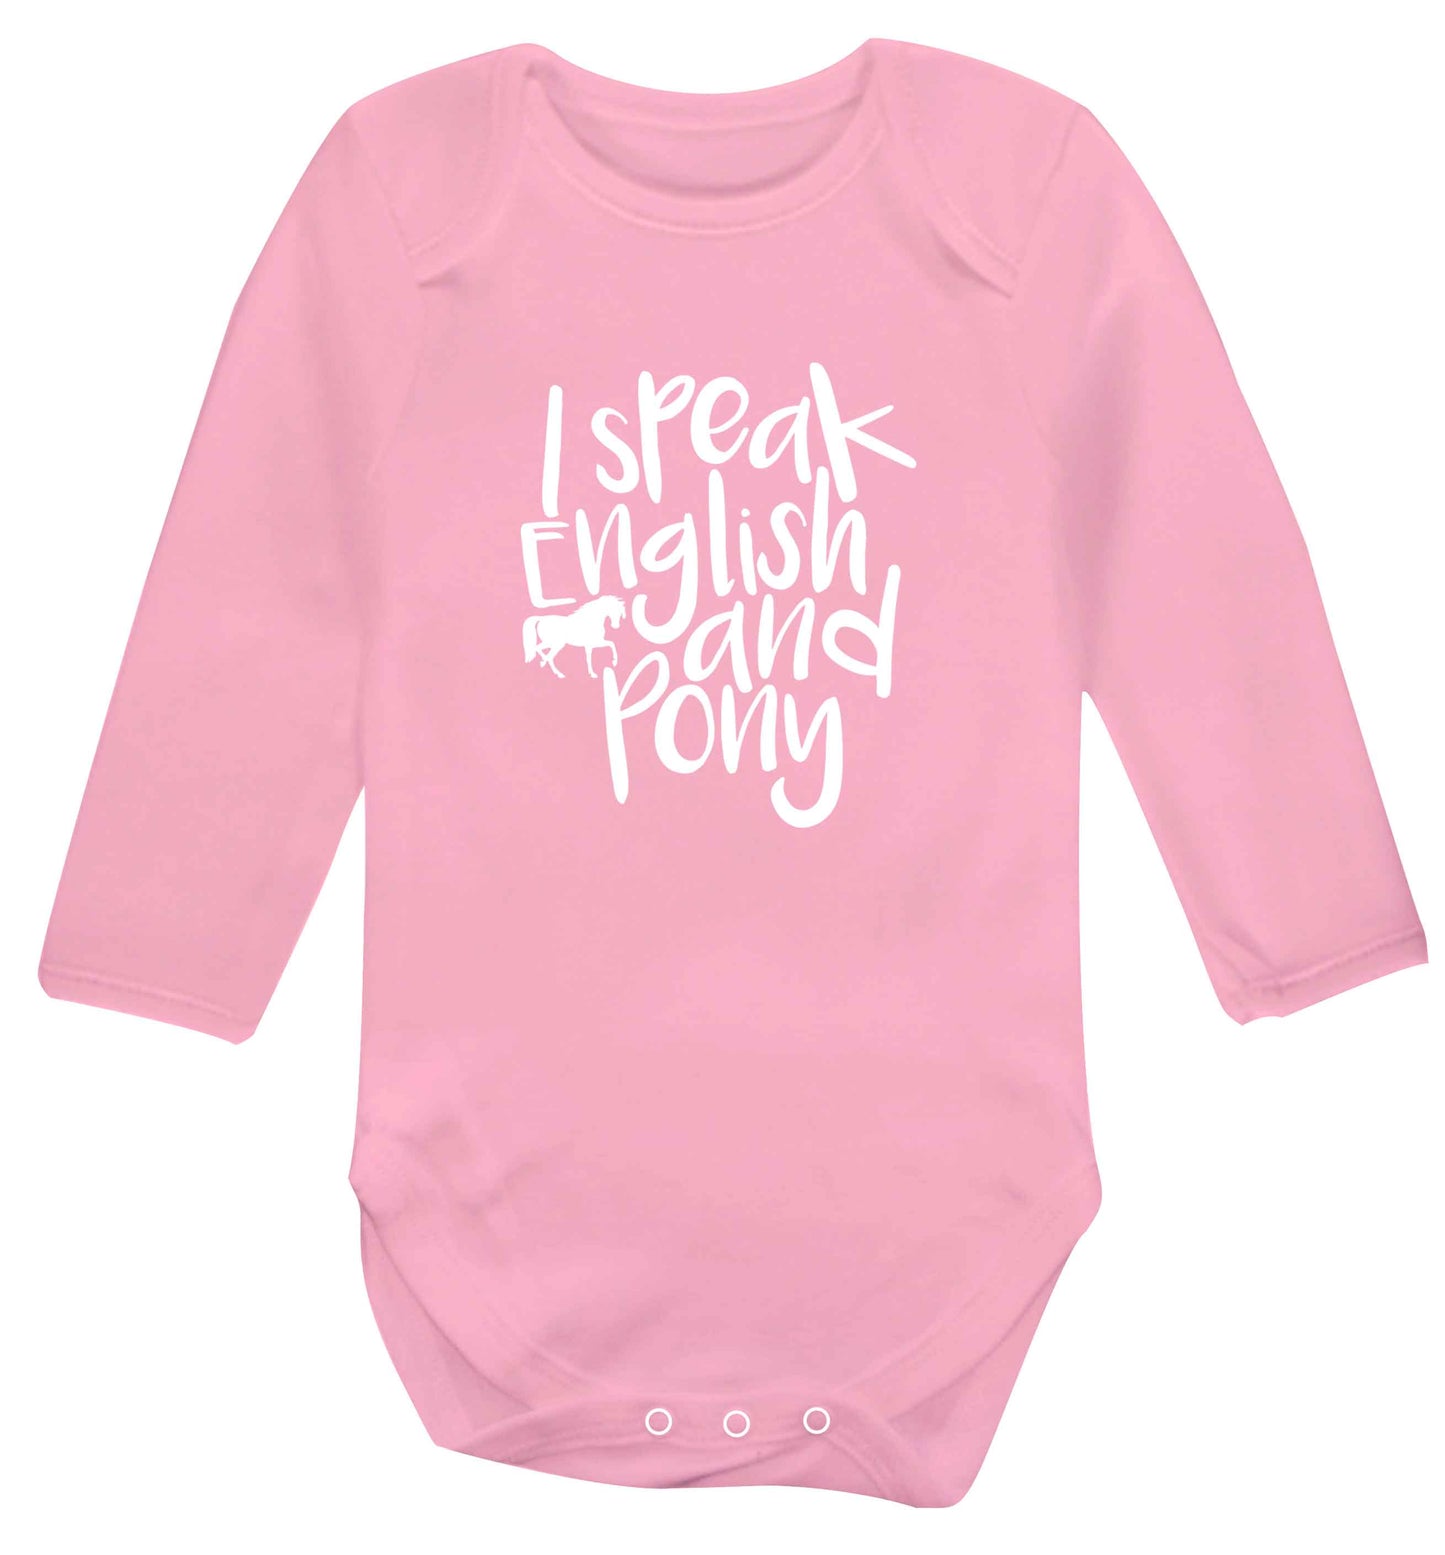 I speak English and pony baby vest long sleeved pale pink 6-12 months